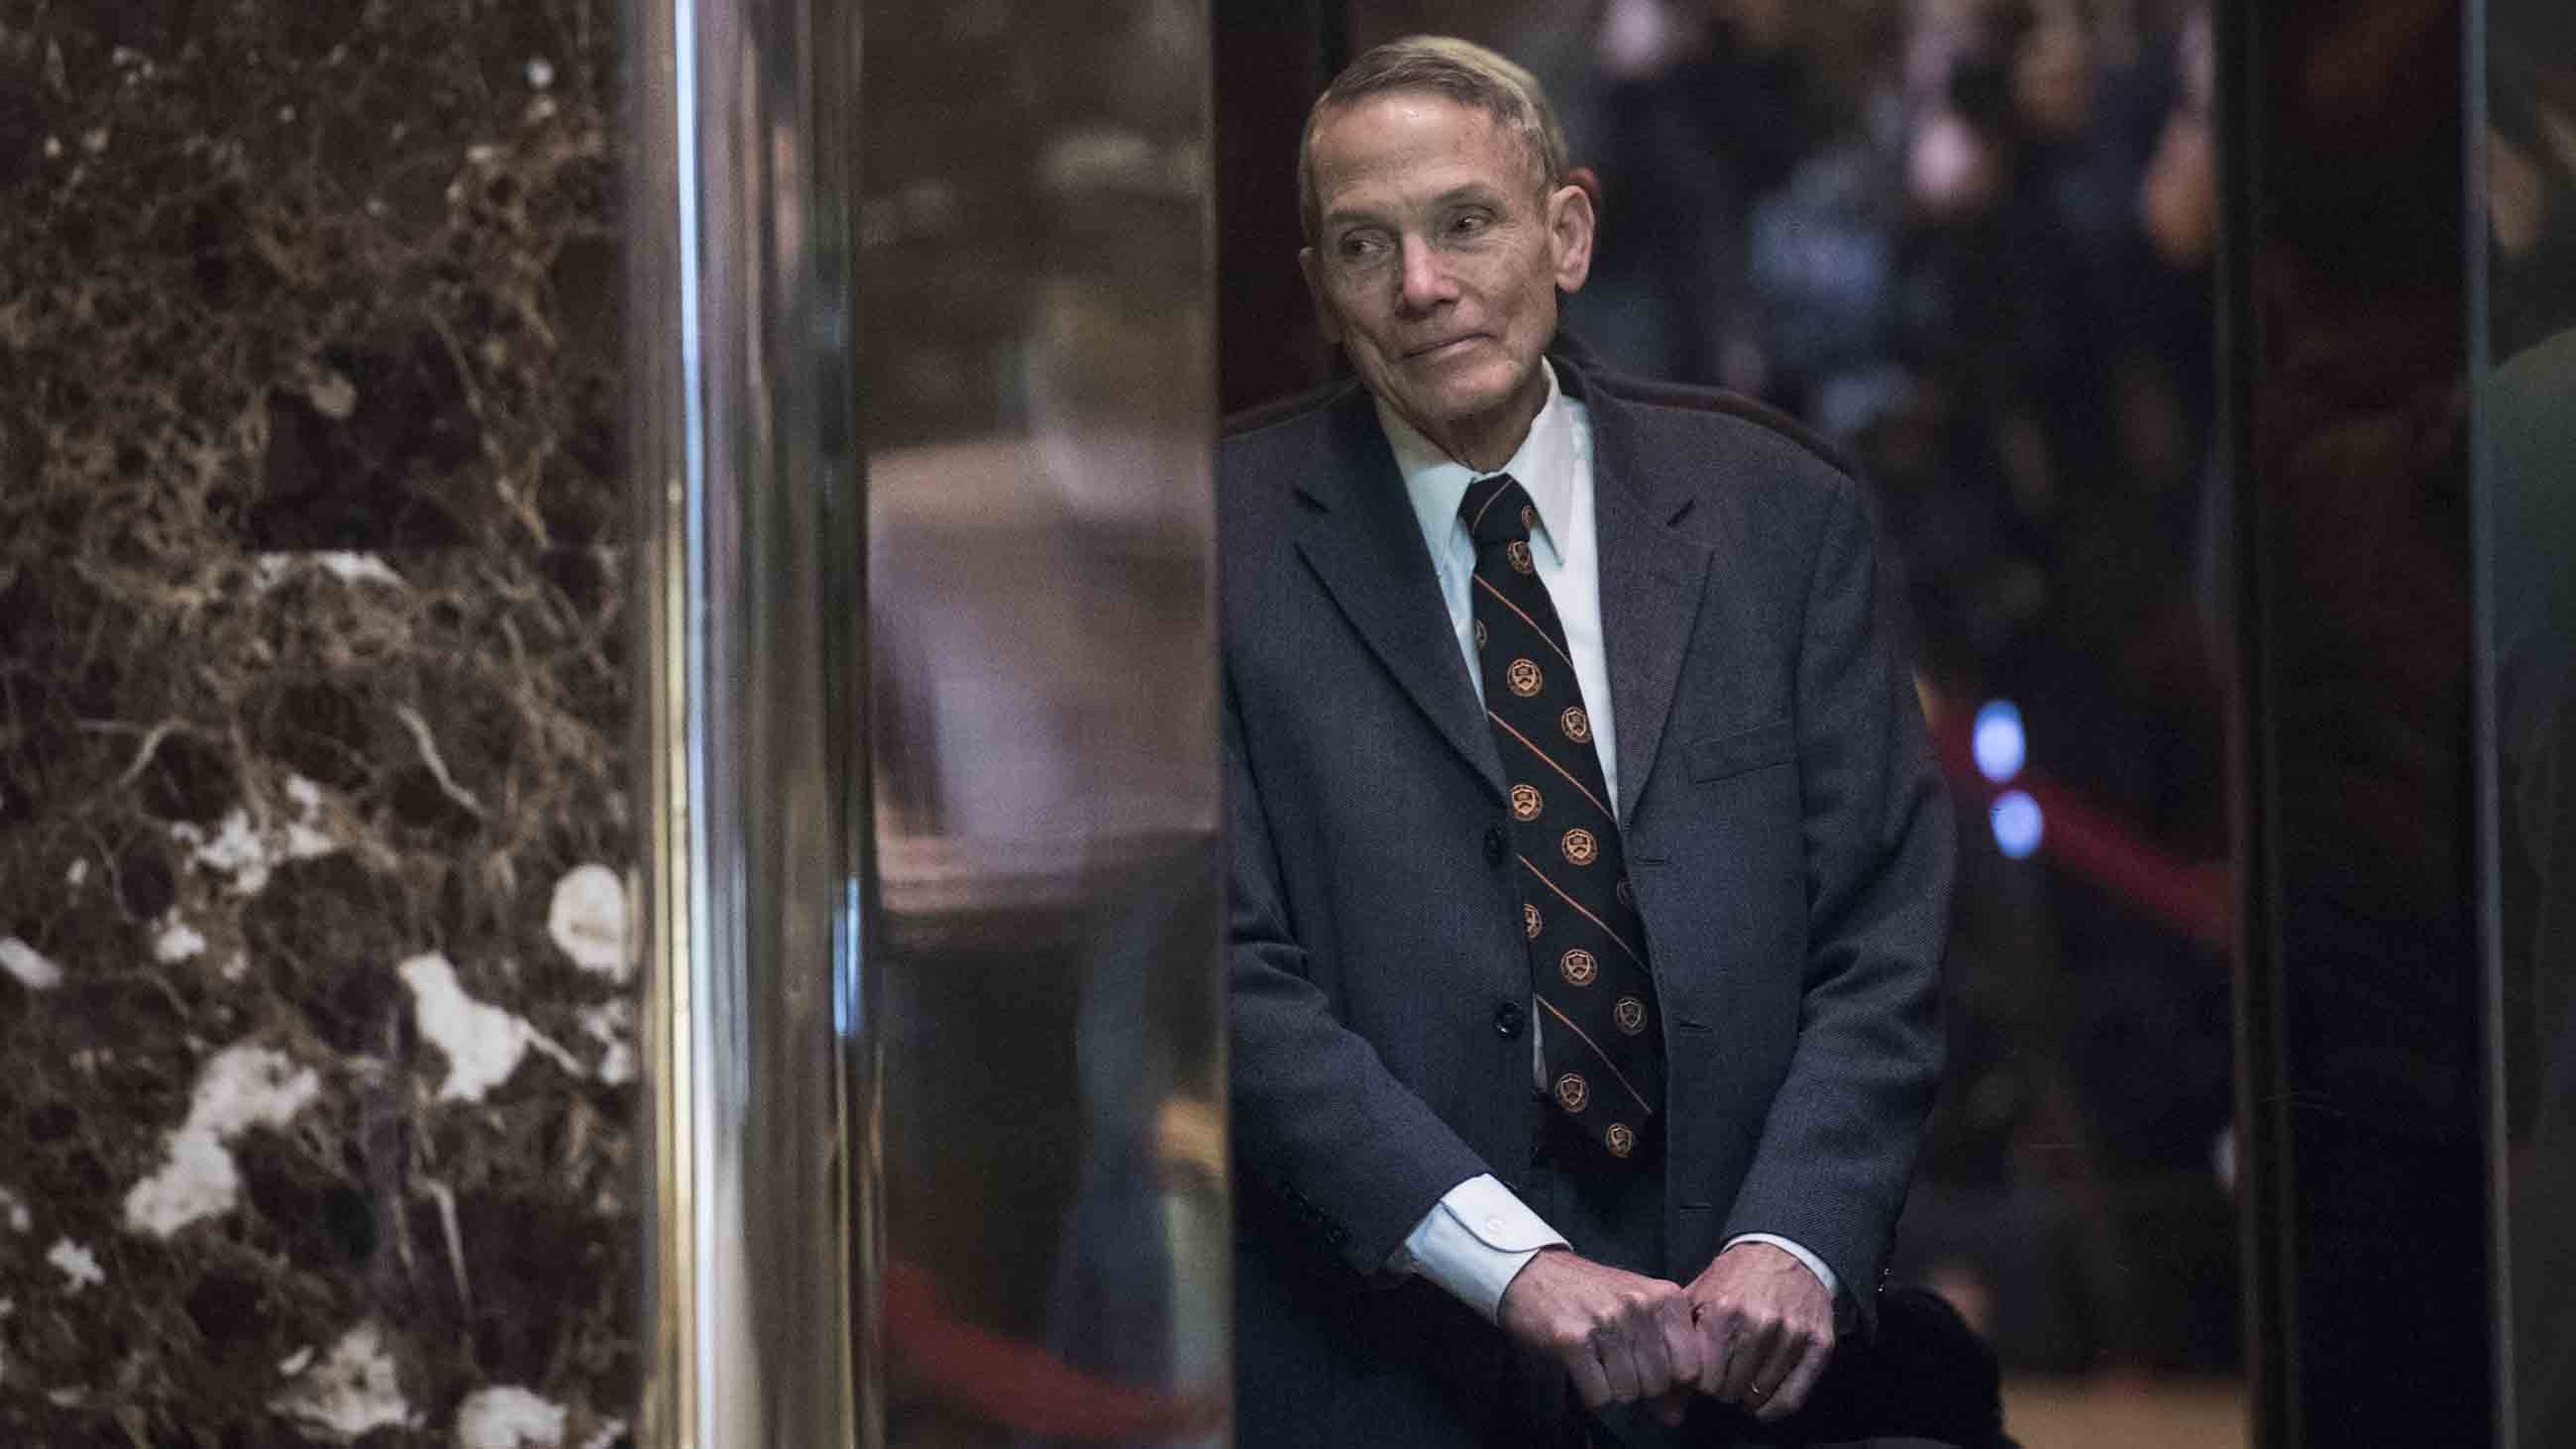 In 2015, William Happer founded a non-profit to tout the benefits of carbon dioxide.